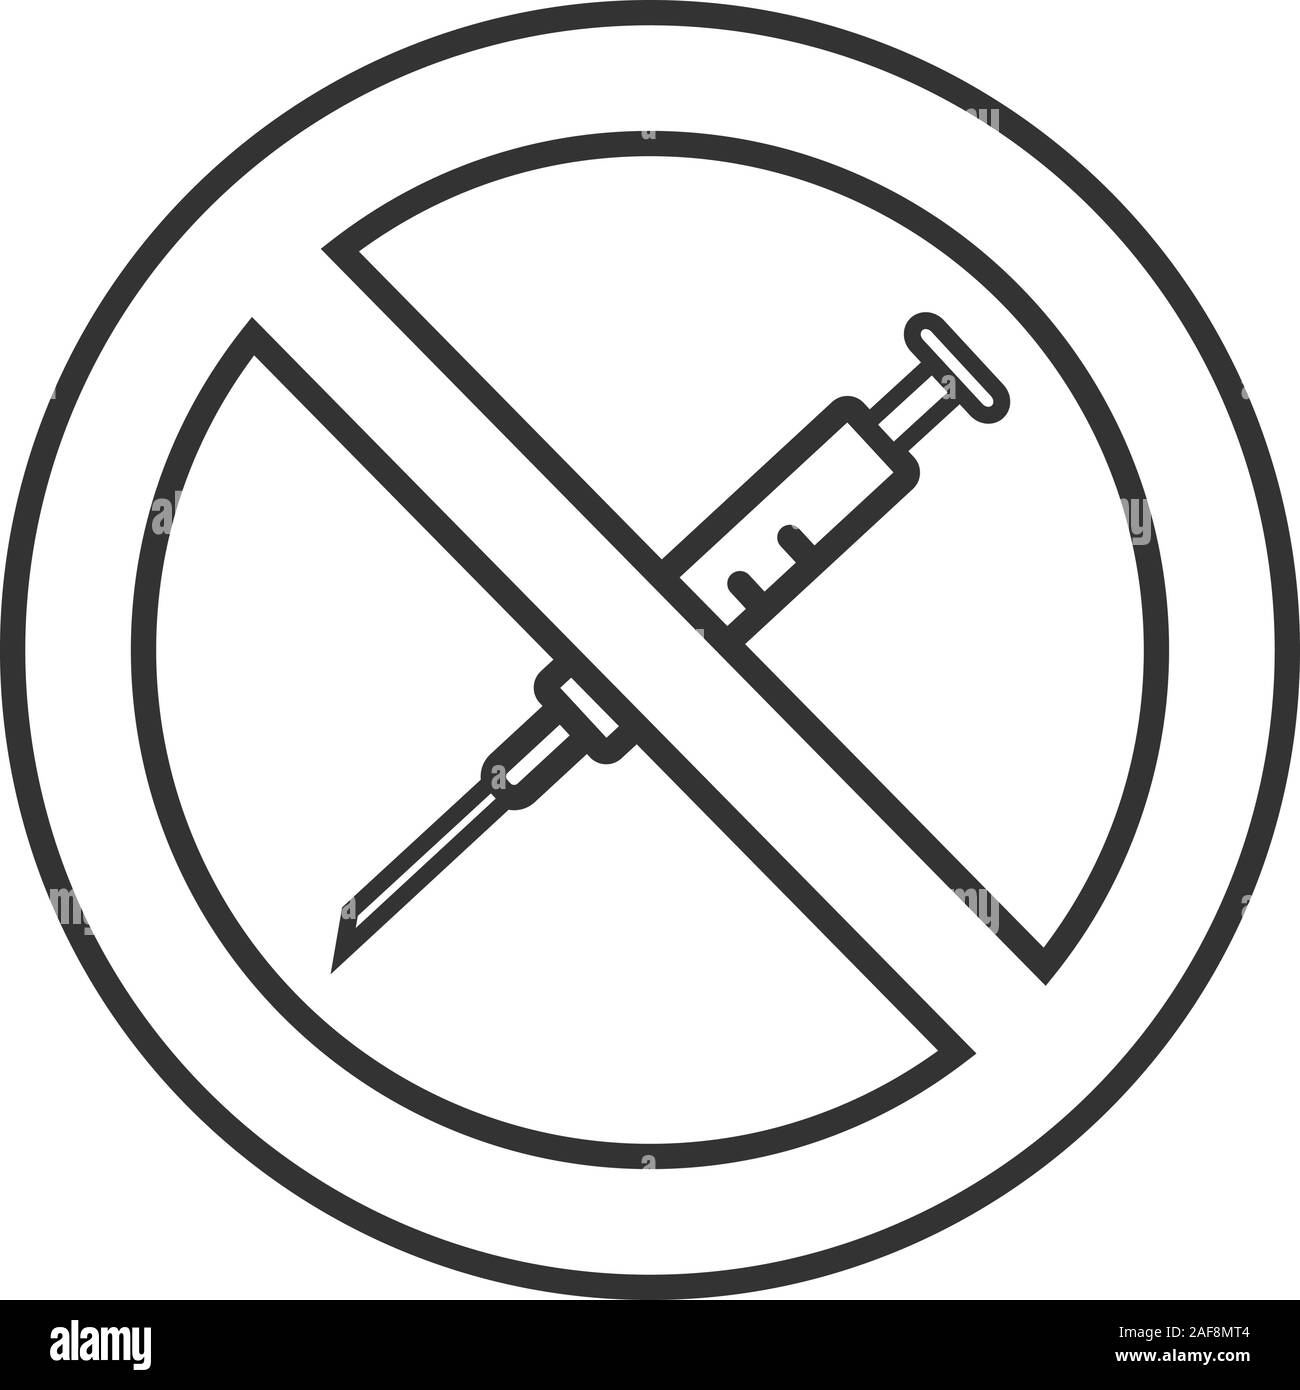 Forbidden sign with syringe linear icon. Thin line illustration. No drugs prohibition. Stop contour symbol. Vector isolated outline drawing Stock Vector